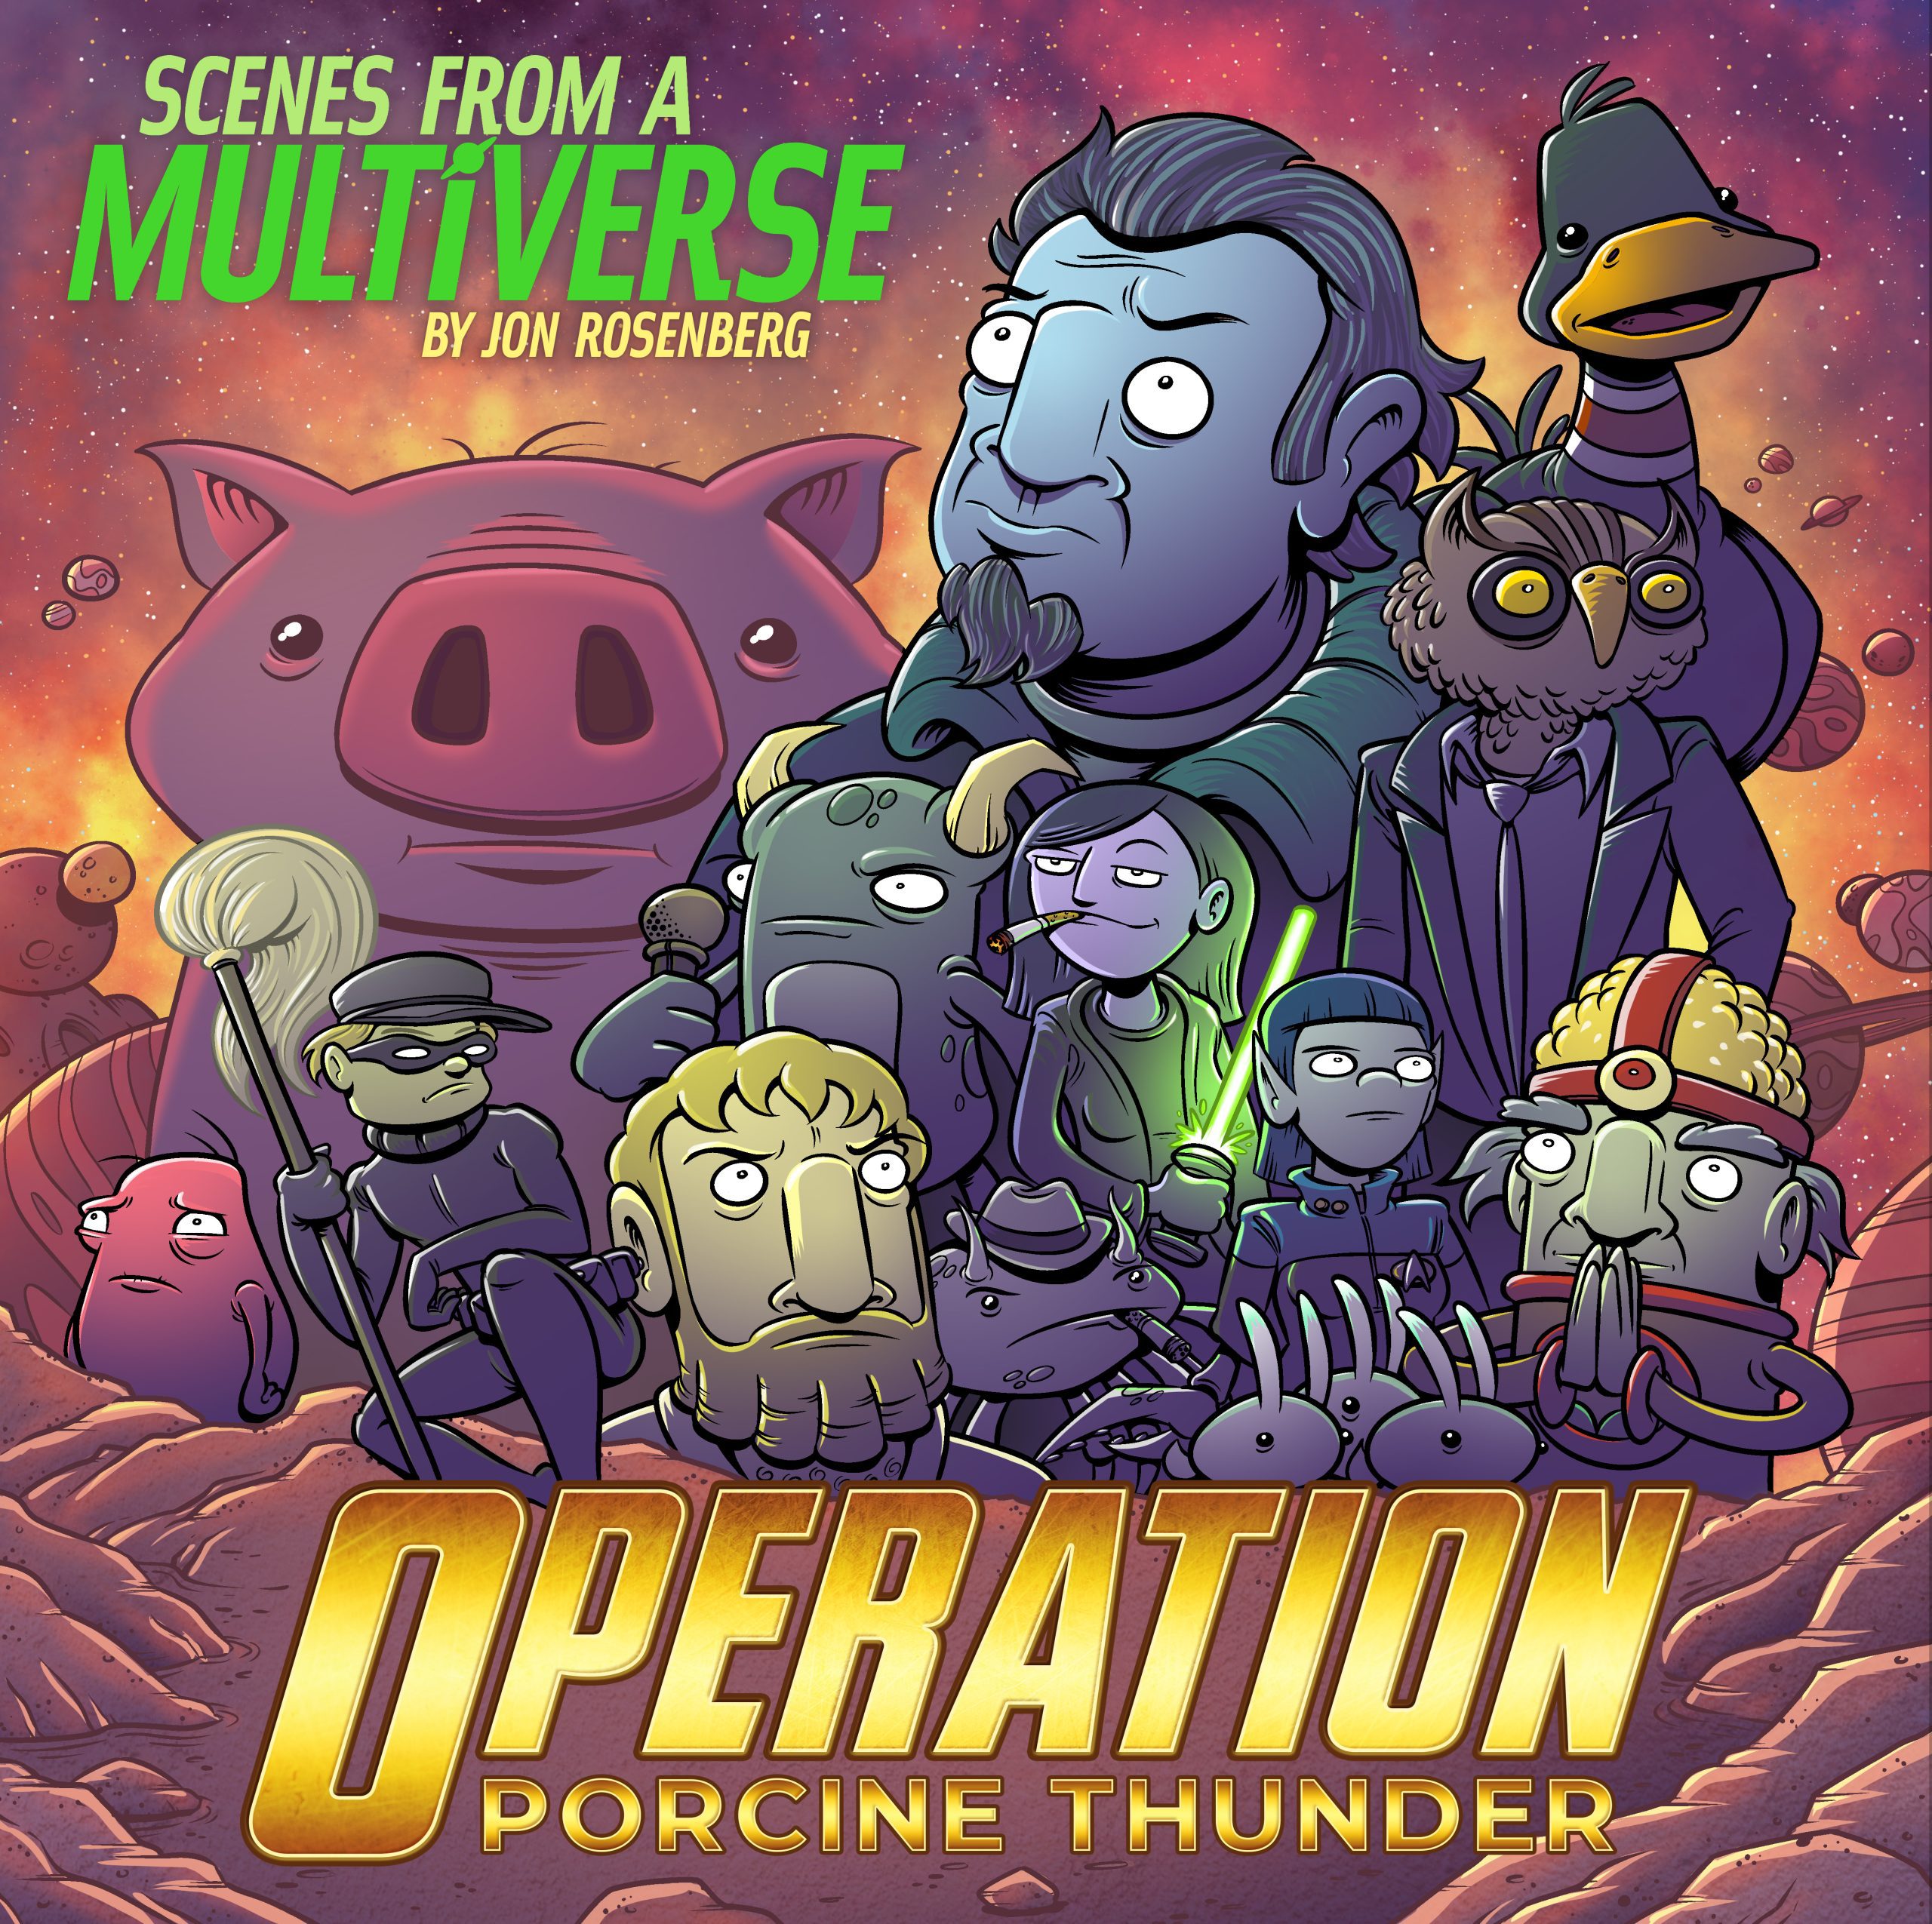 Scenes from a Multiverse: Operation Porcine Thunder